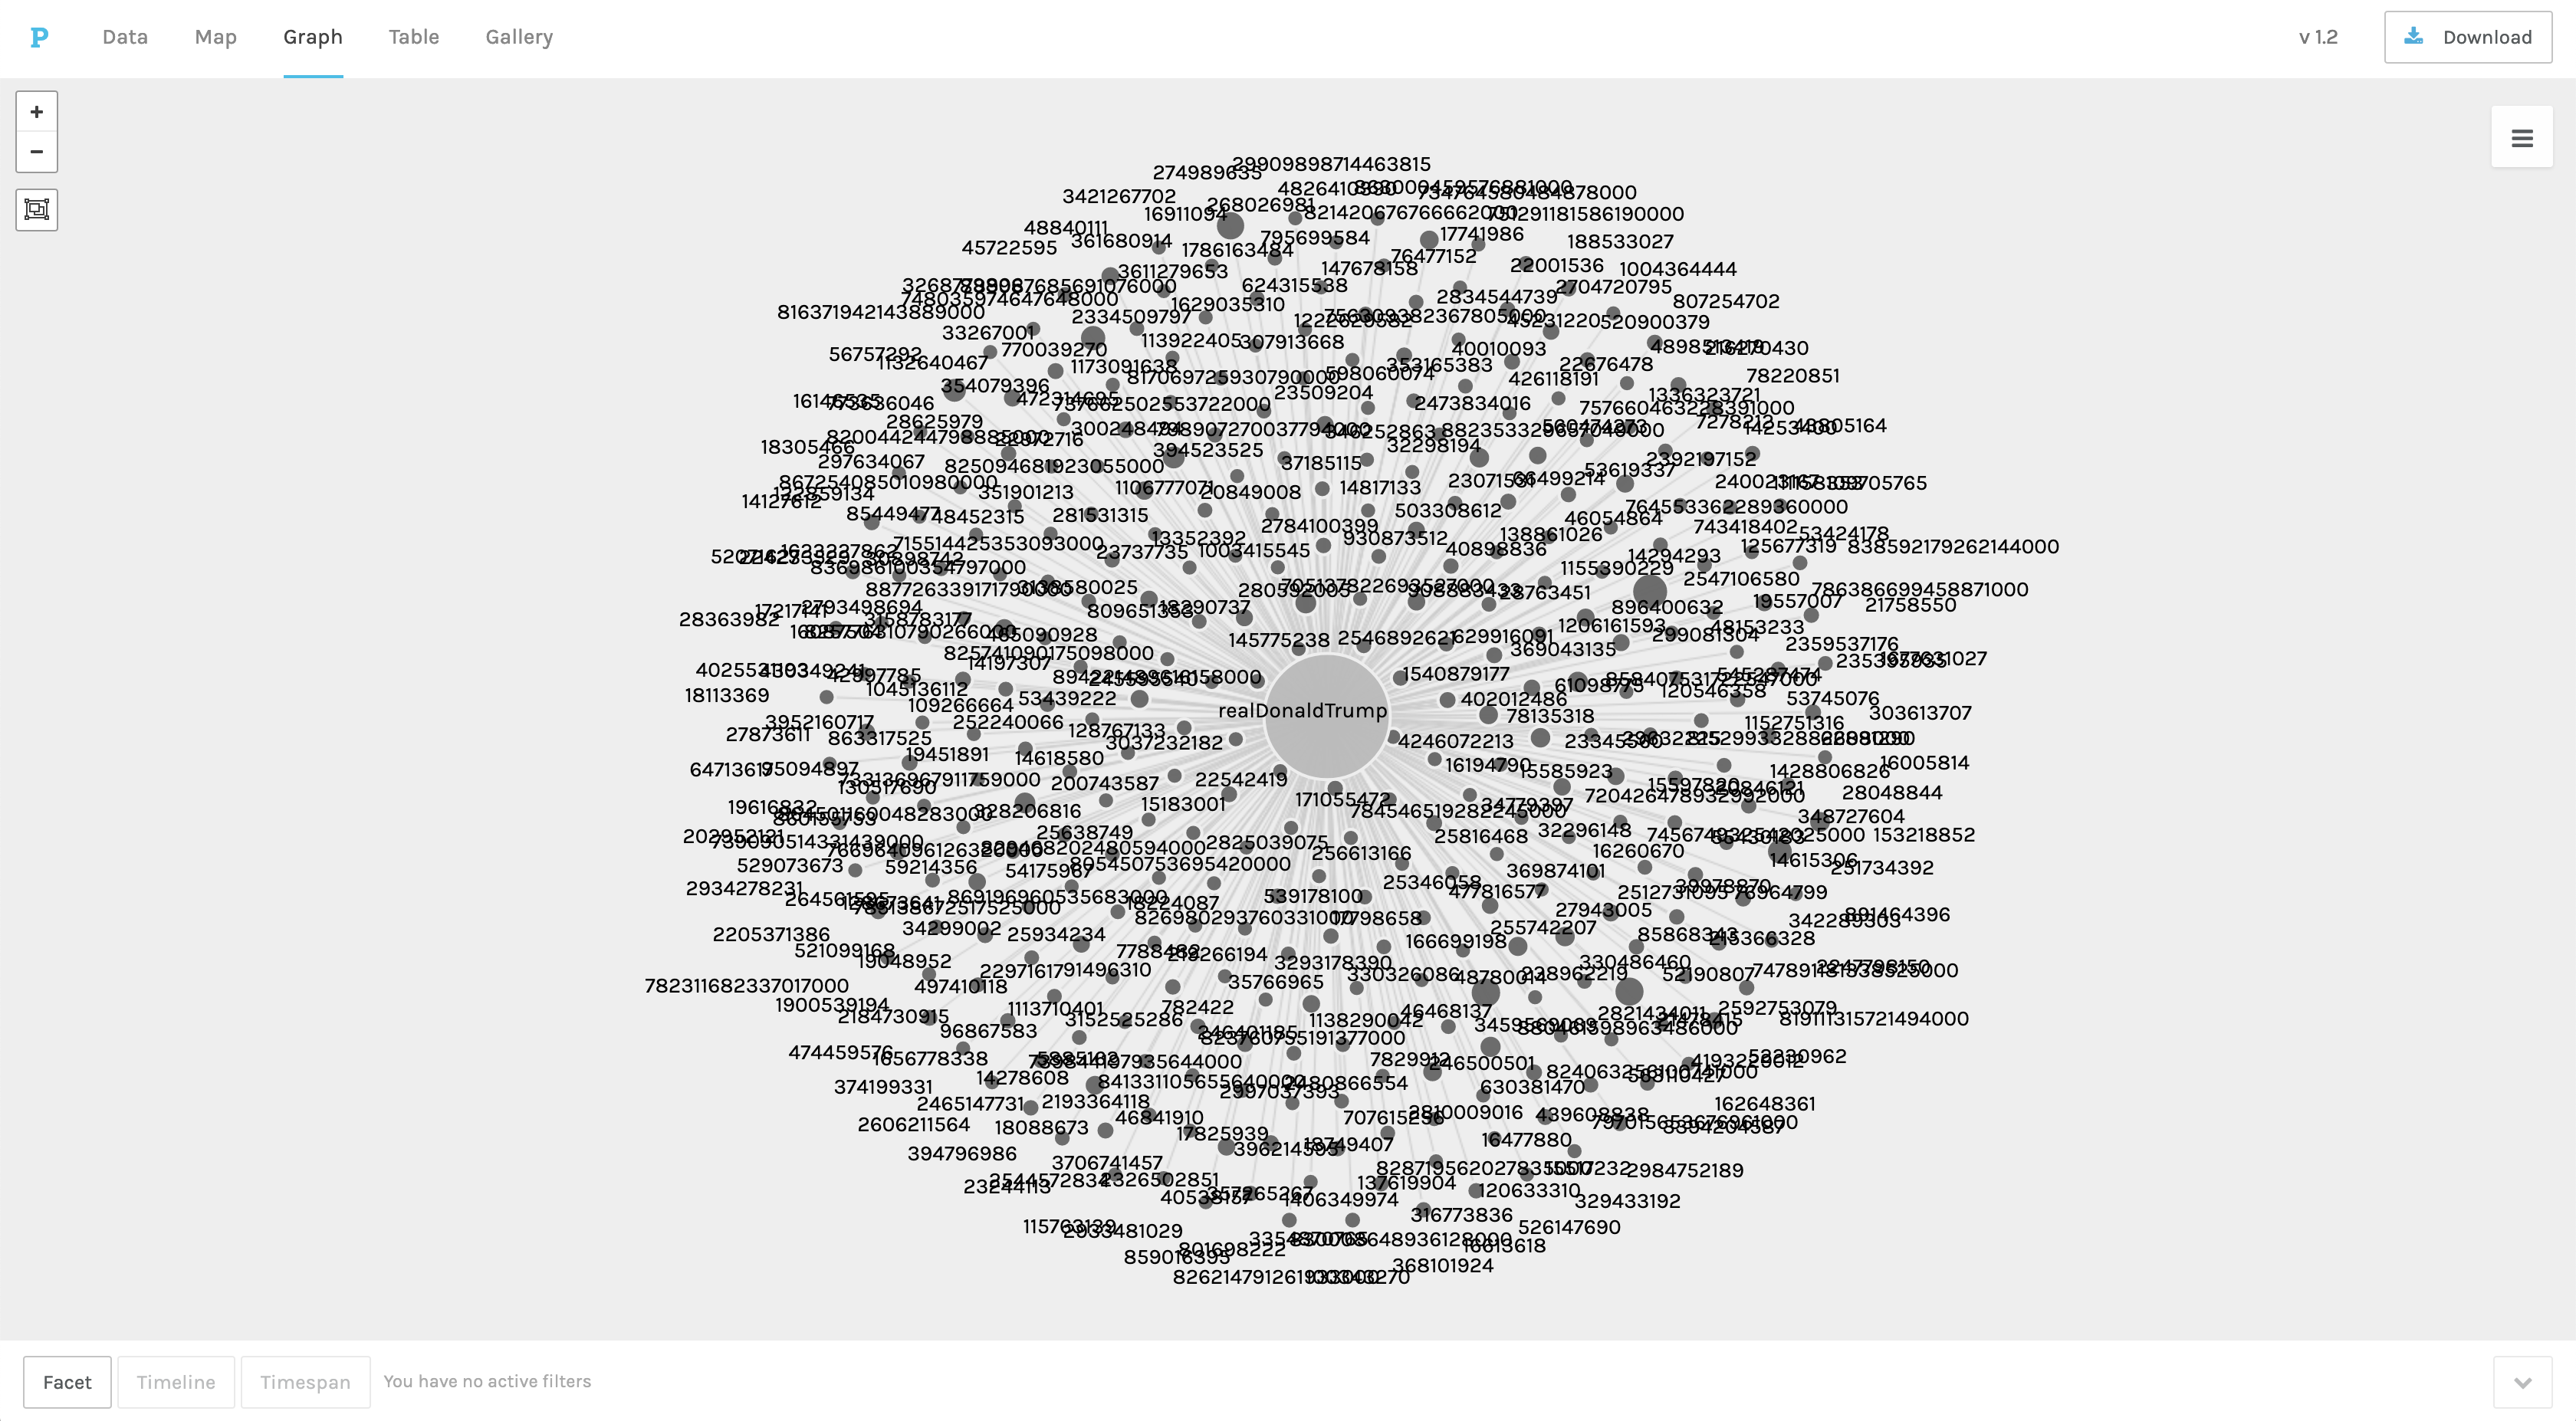 A very quick social network sketch showing the users who most often mentioned @realDonaldTrump in their hurricane tweets.  Done in Palladio.